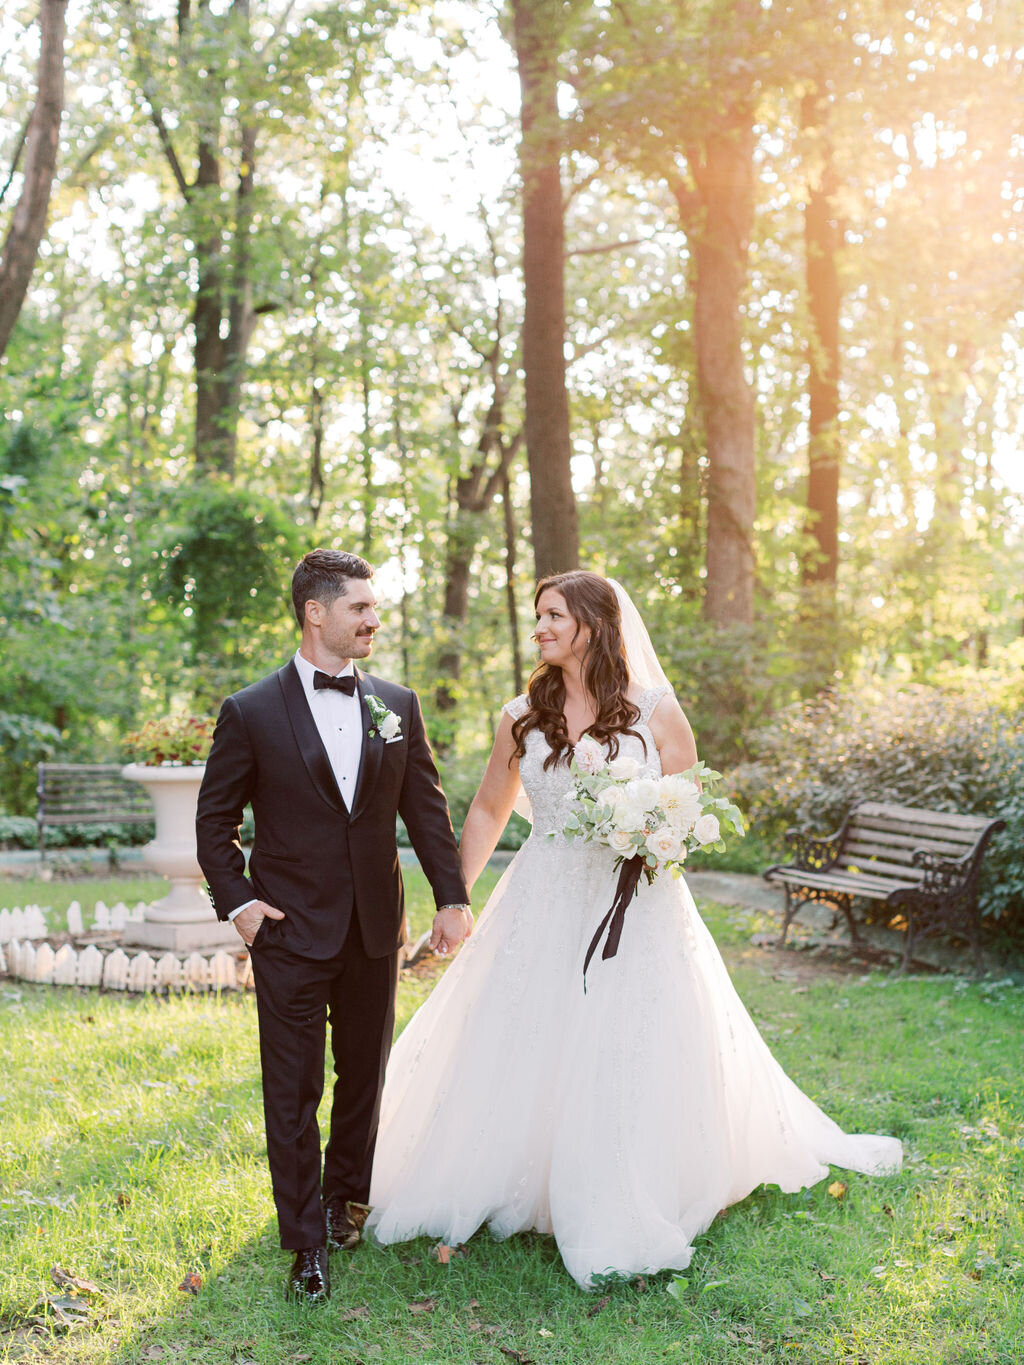 Kate Campbell Floral Fall Wedding Liriodendron Mansion by Molly Litchen28